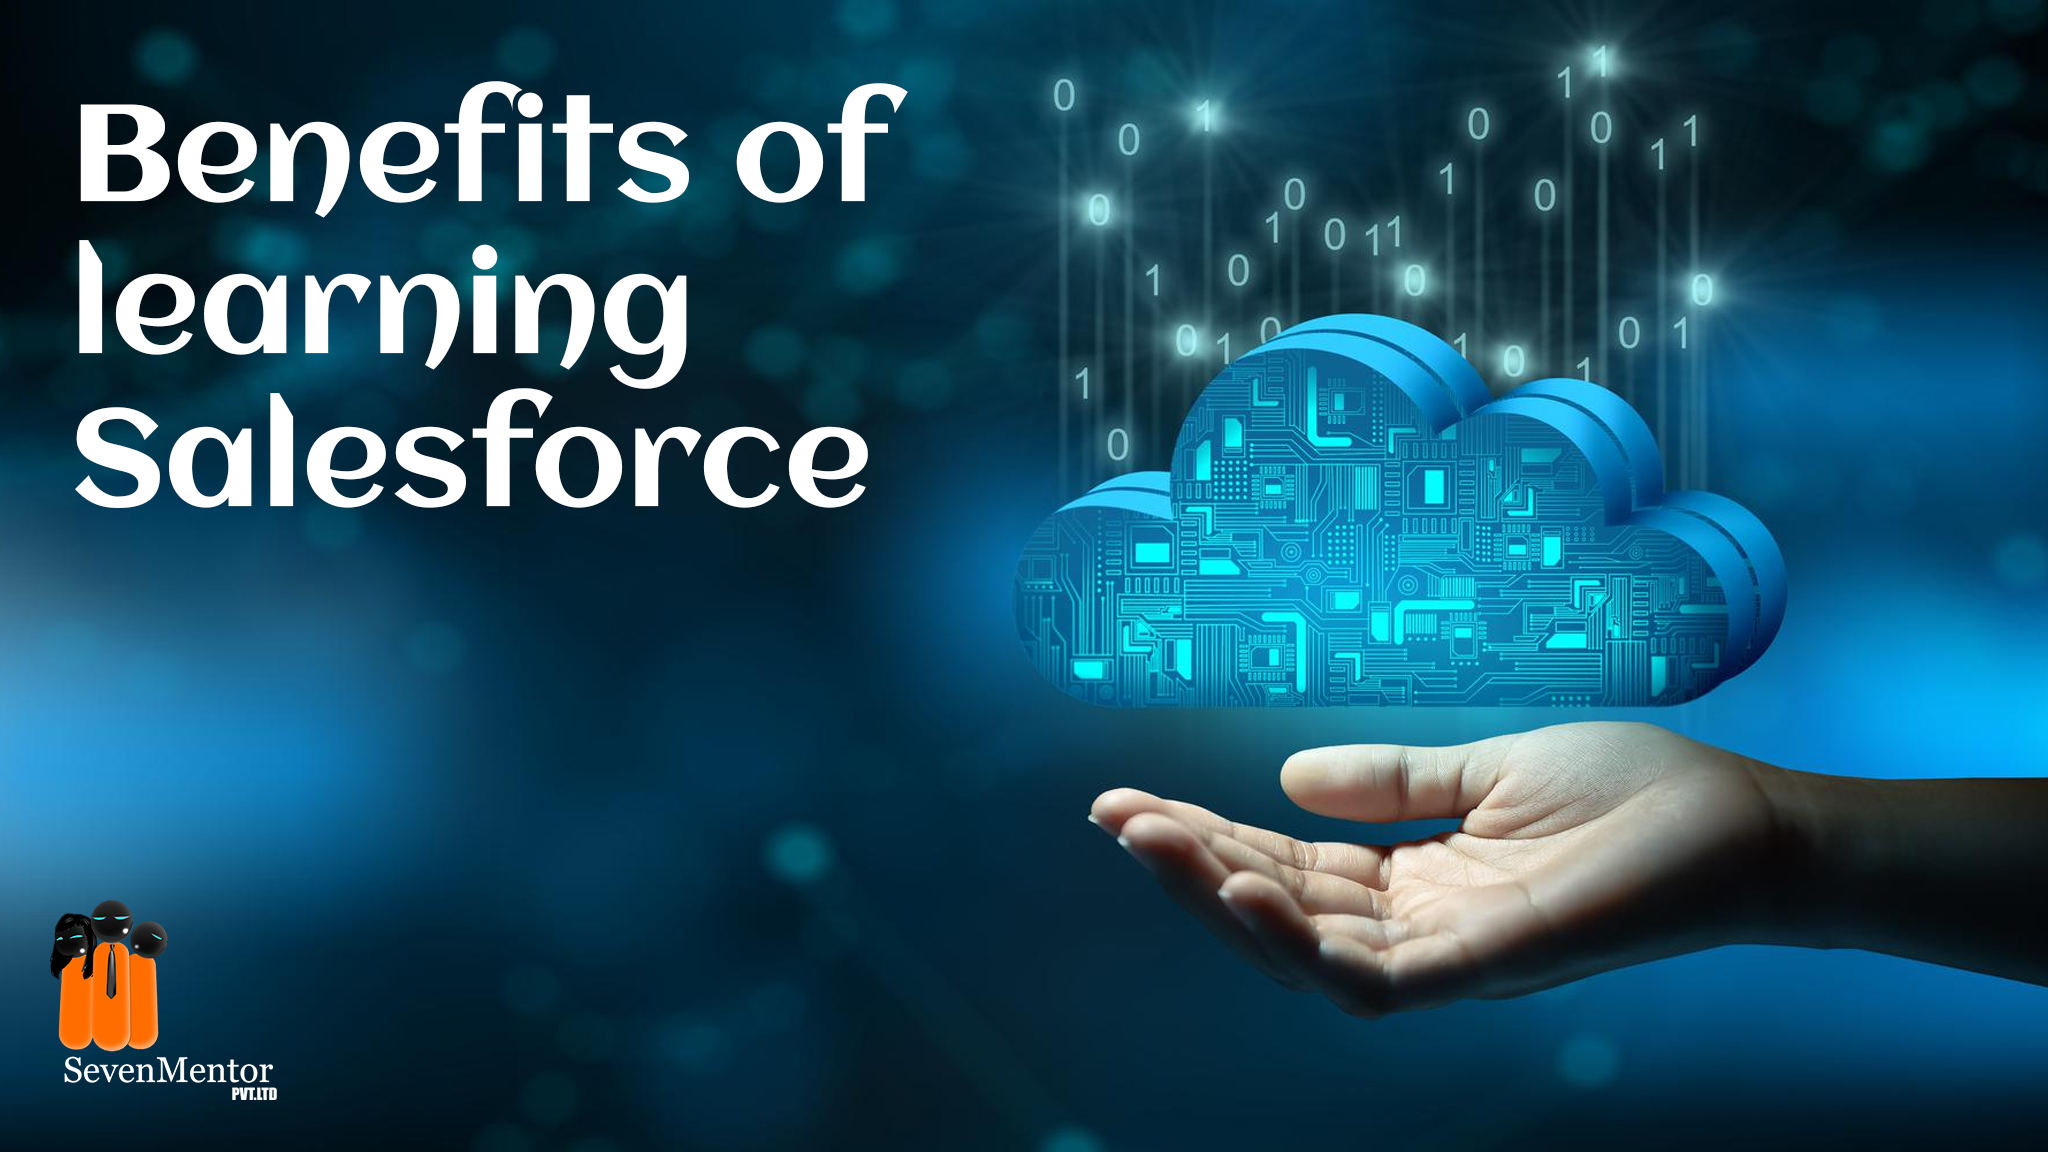 Benefits of learning Salesforce